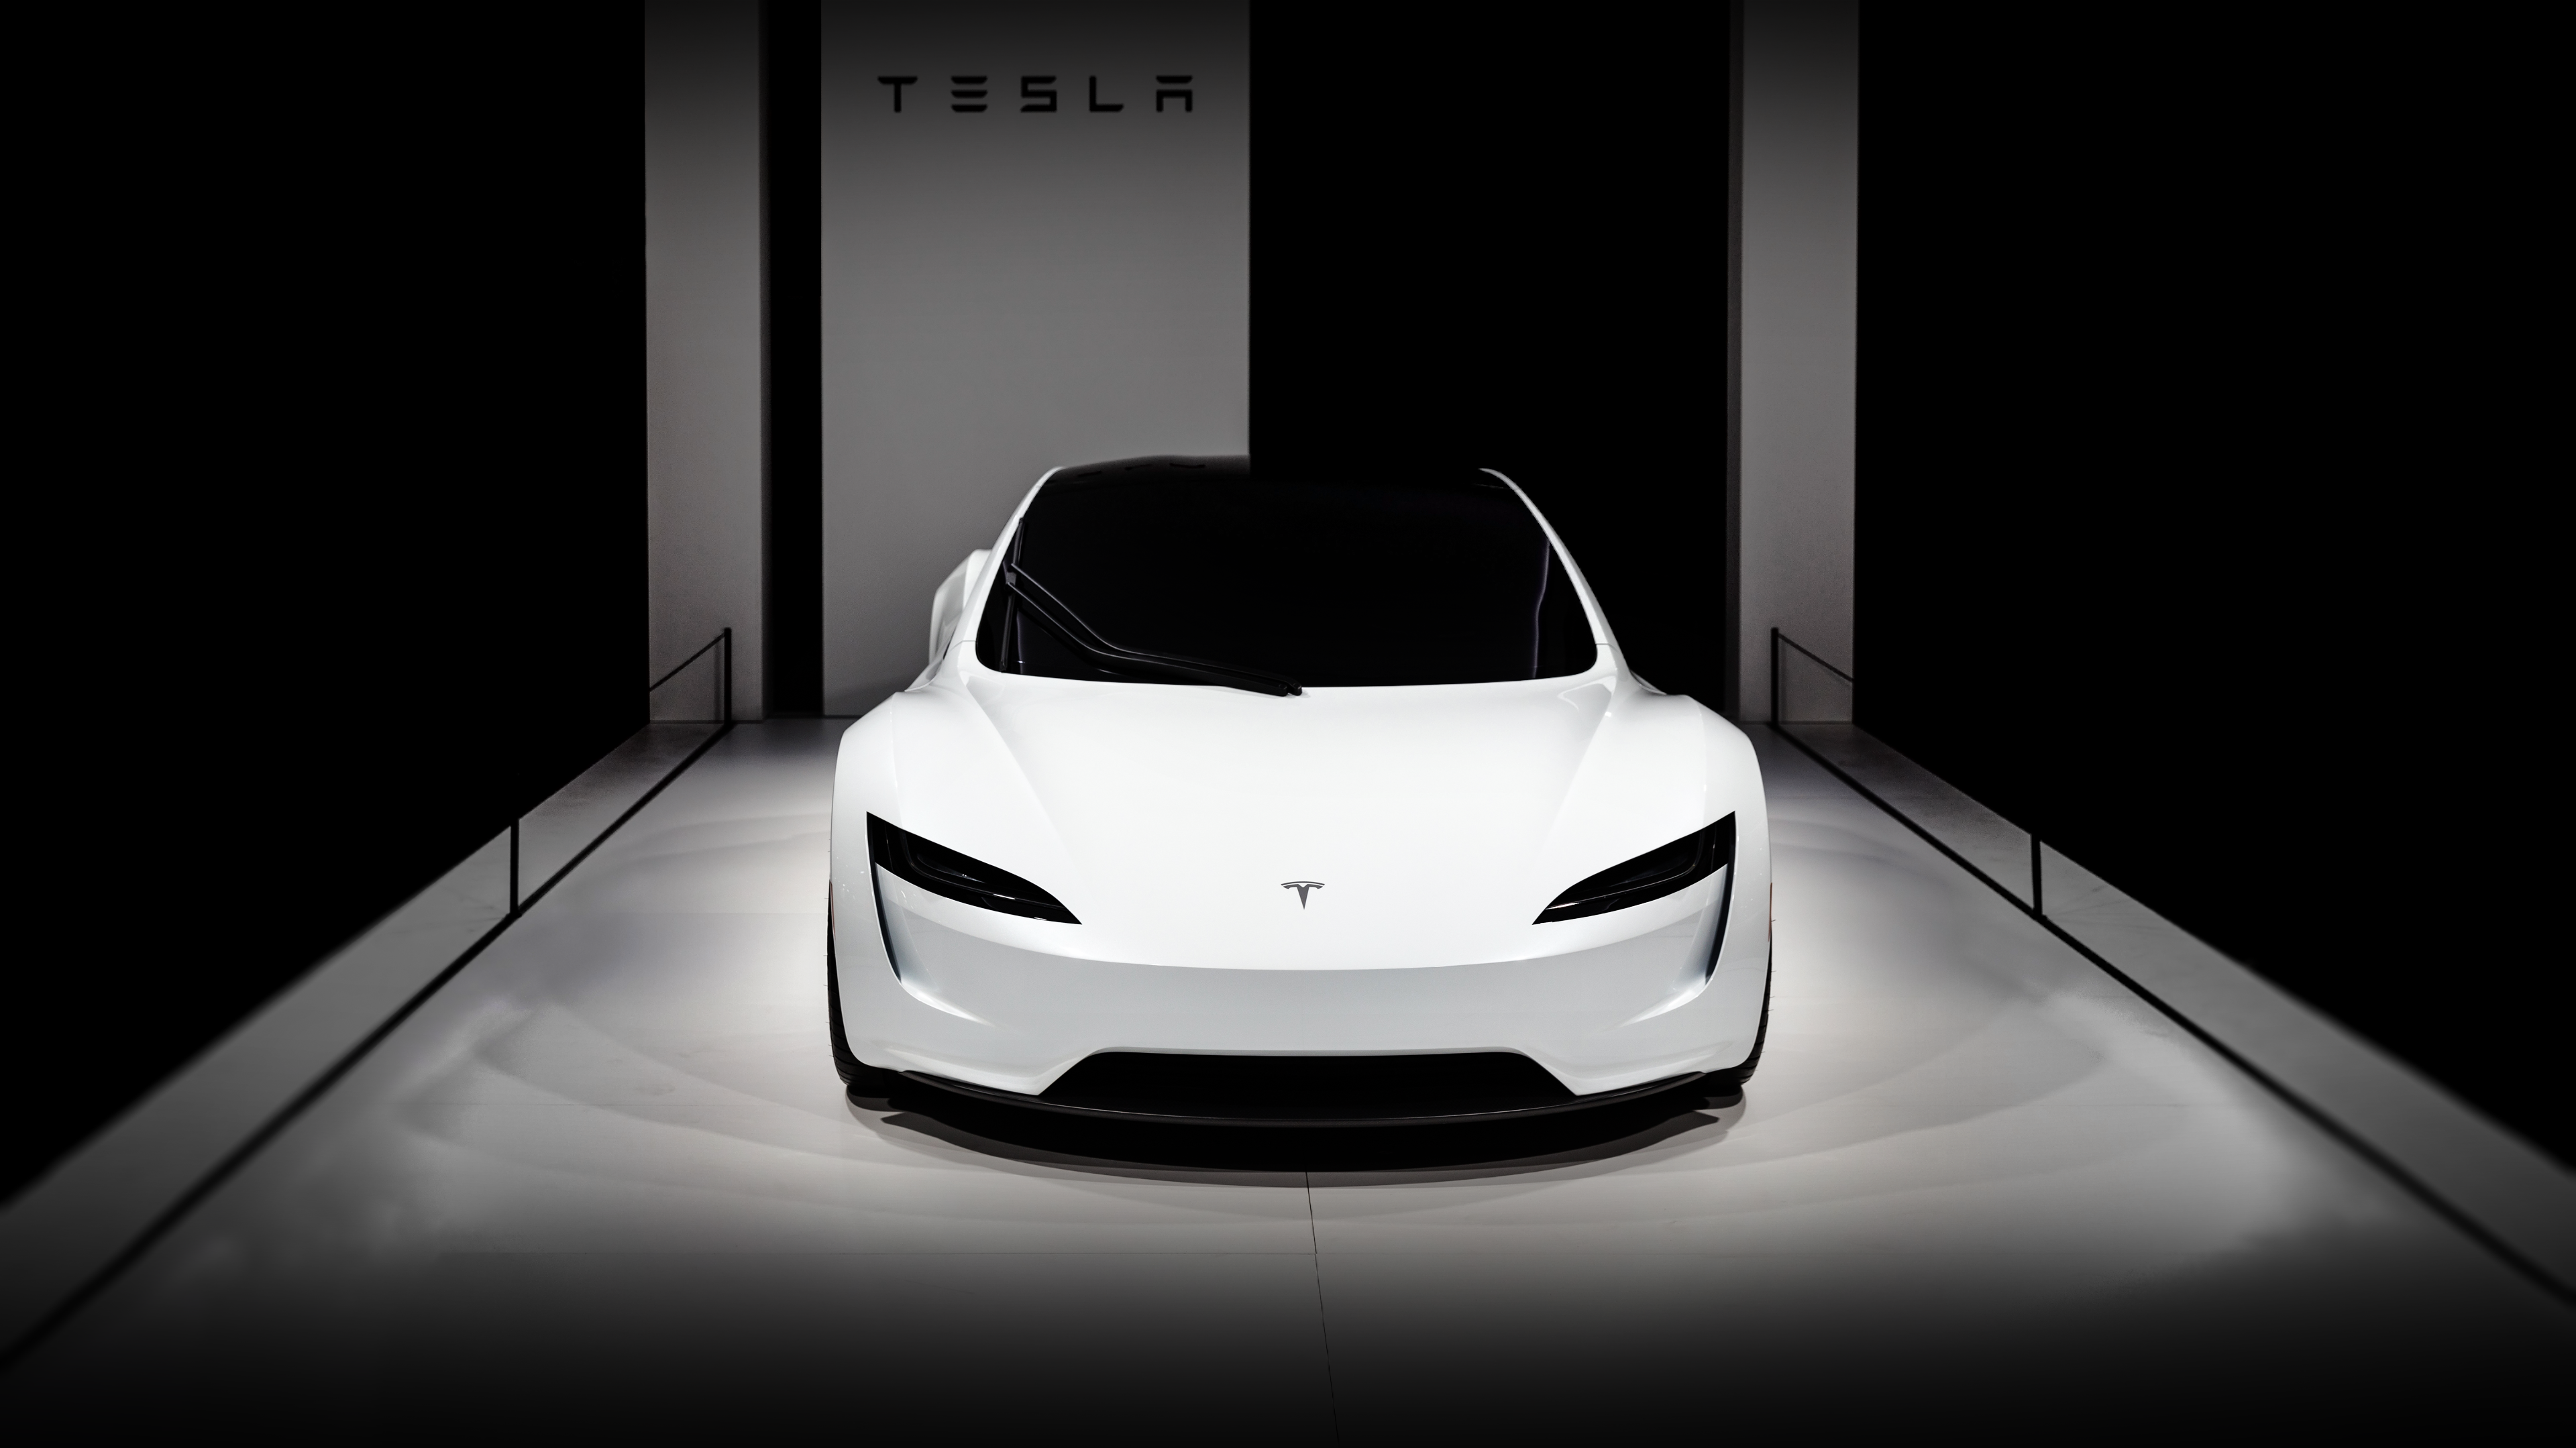 Wanted A Tesla Roadster Wallpaper So I Made This From Grand